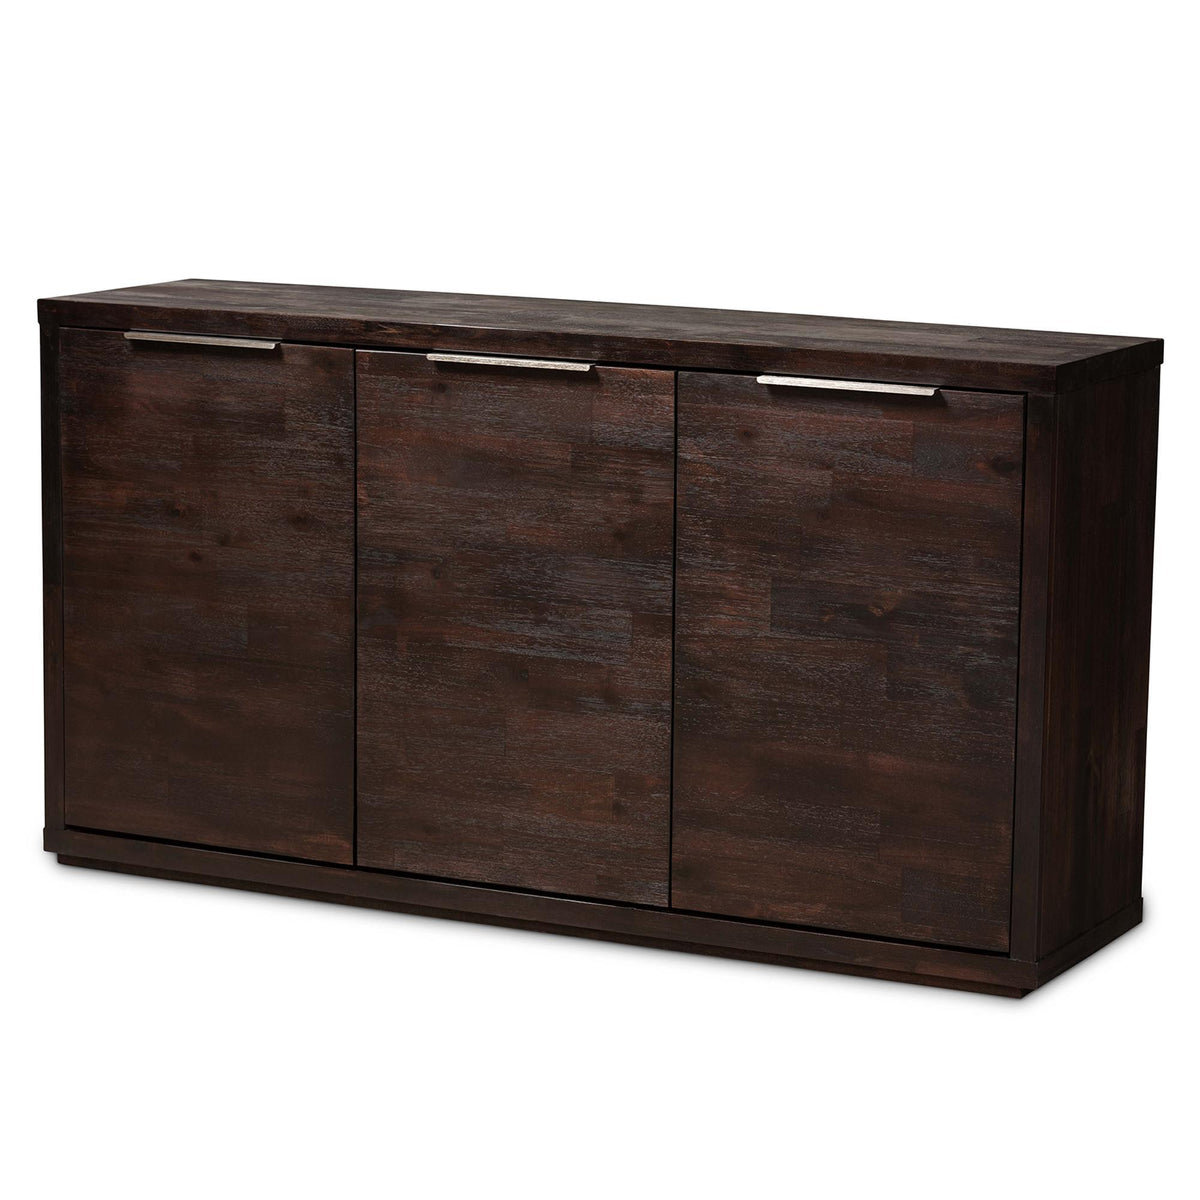 Baxton Studio Titus Modern And Contemporary Dark Brown Finished Wood 3-Door Dining Room Sideboard Buffet  - Titus-Mocha-Sideboard